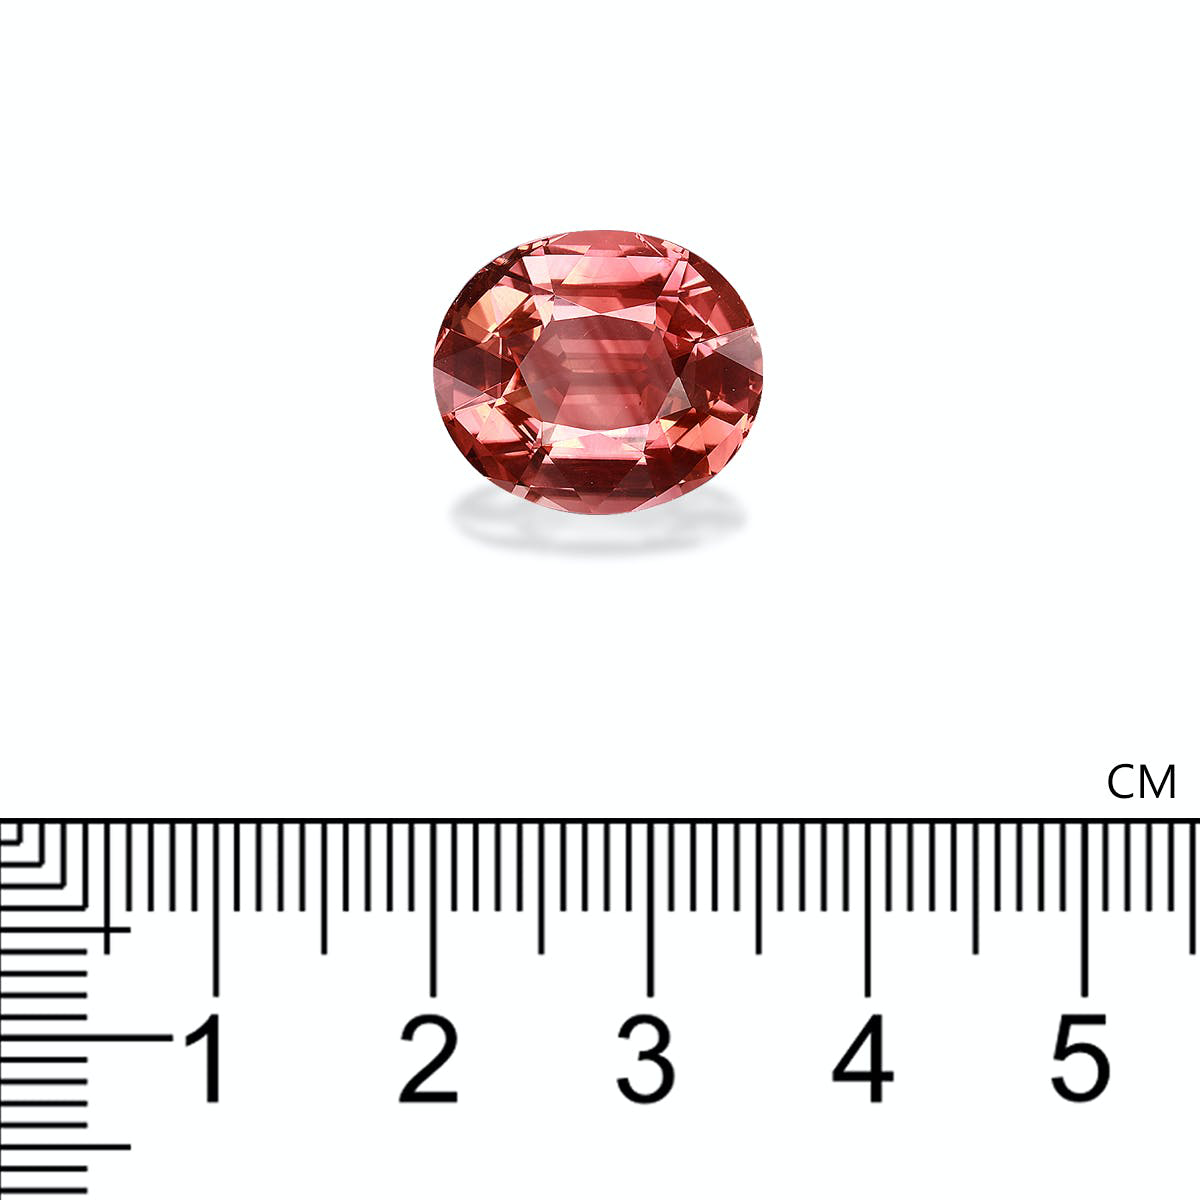 Picture of Peach Pink Tourmaline 9.73ct - 15x13mm (PT0618)